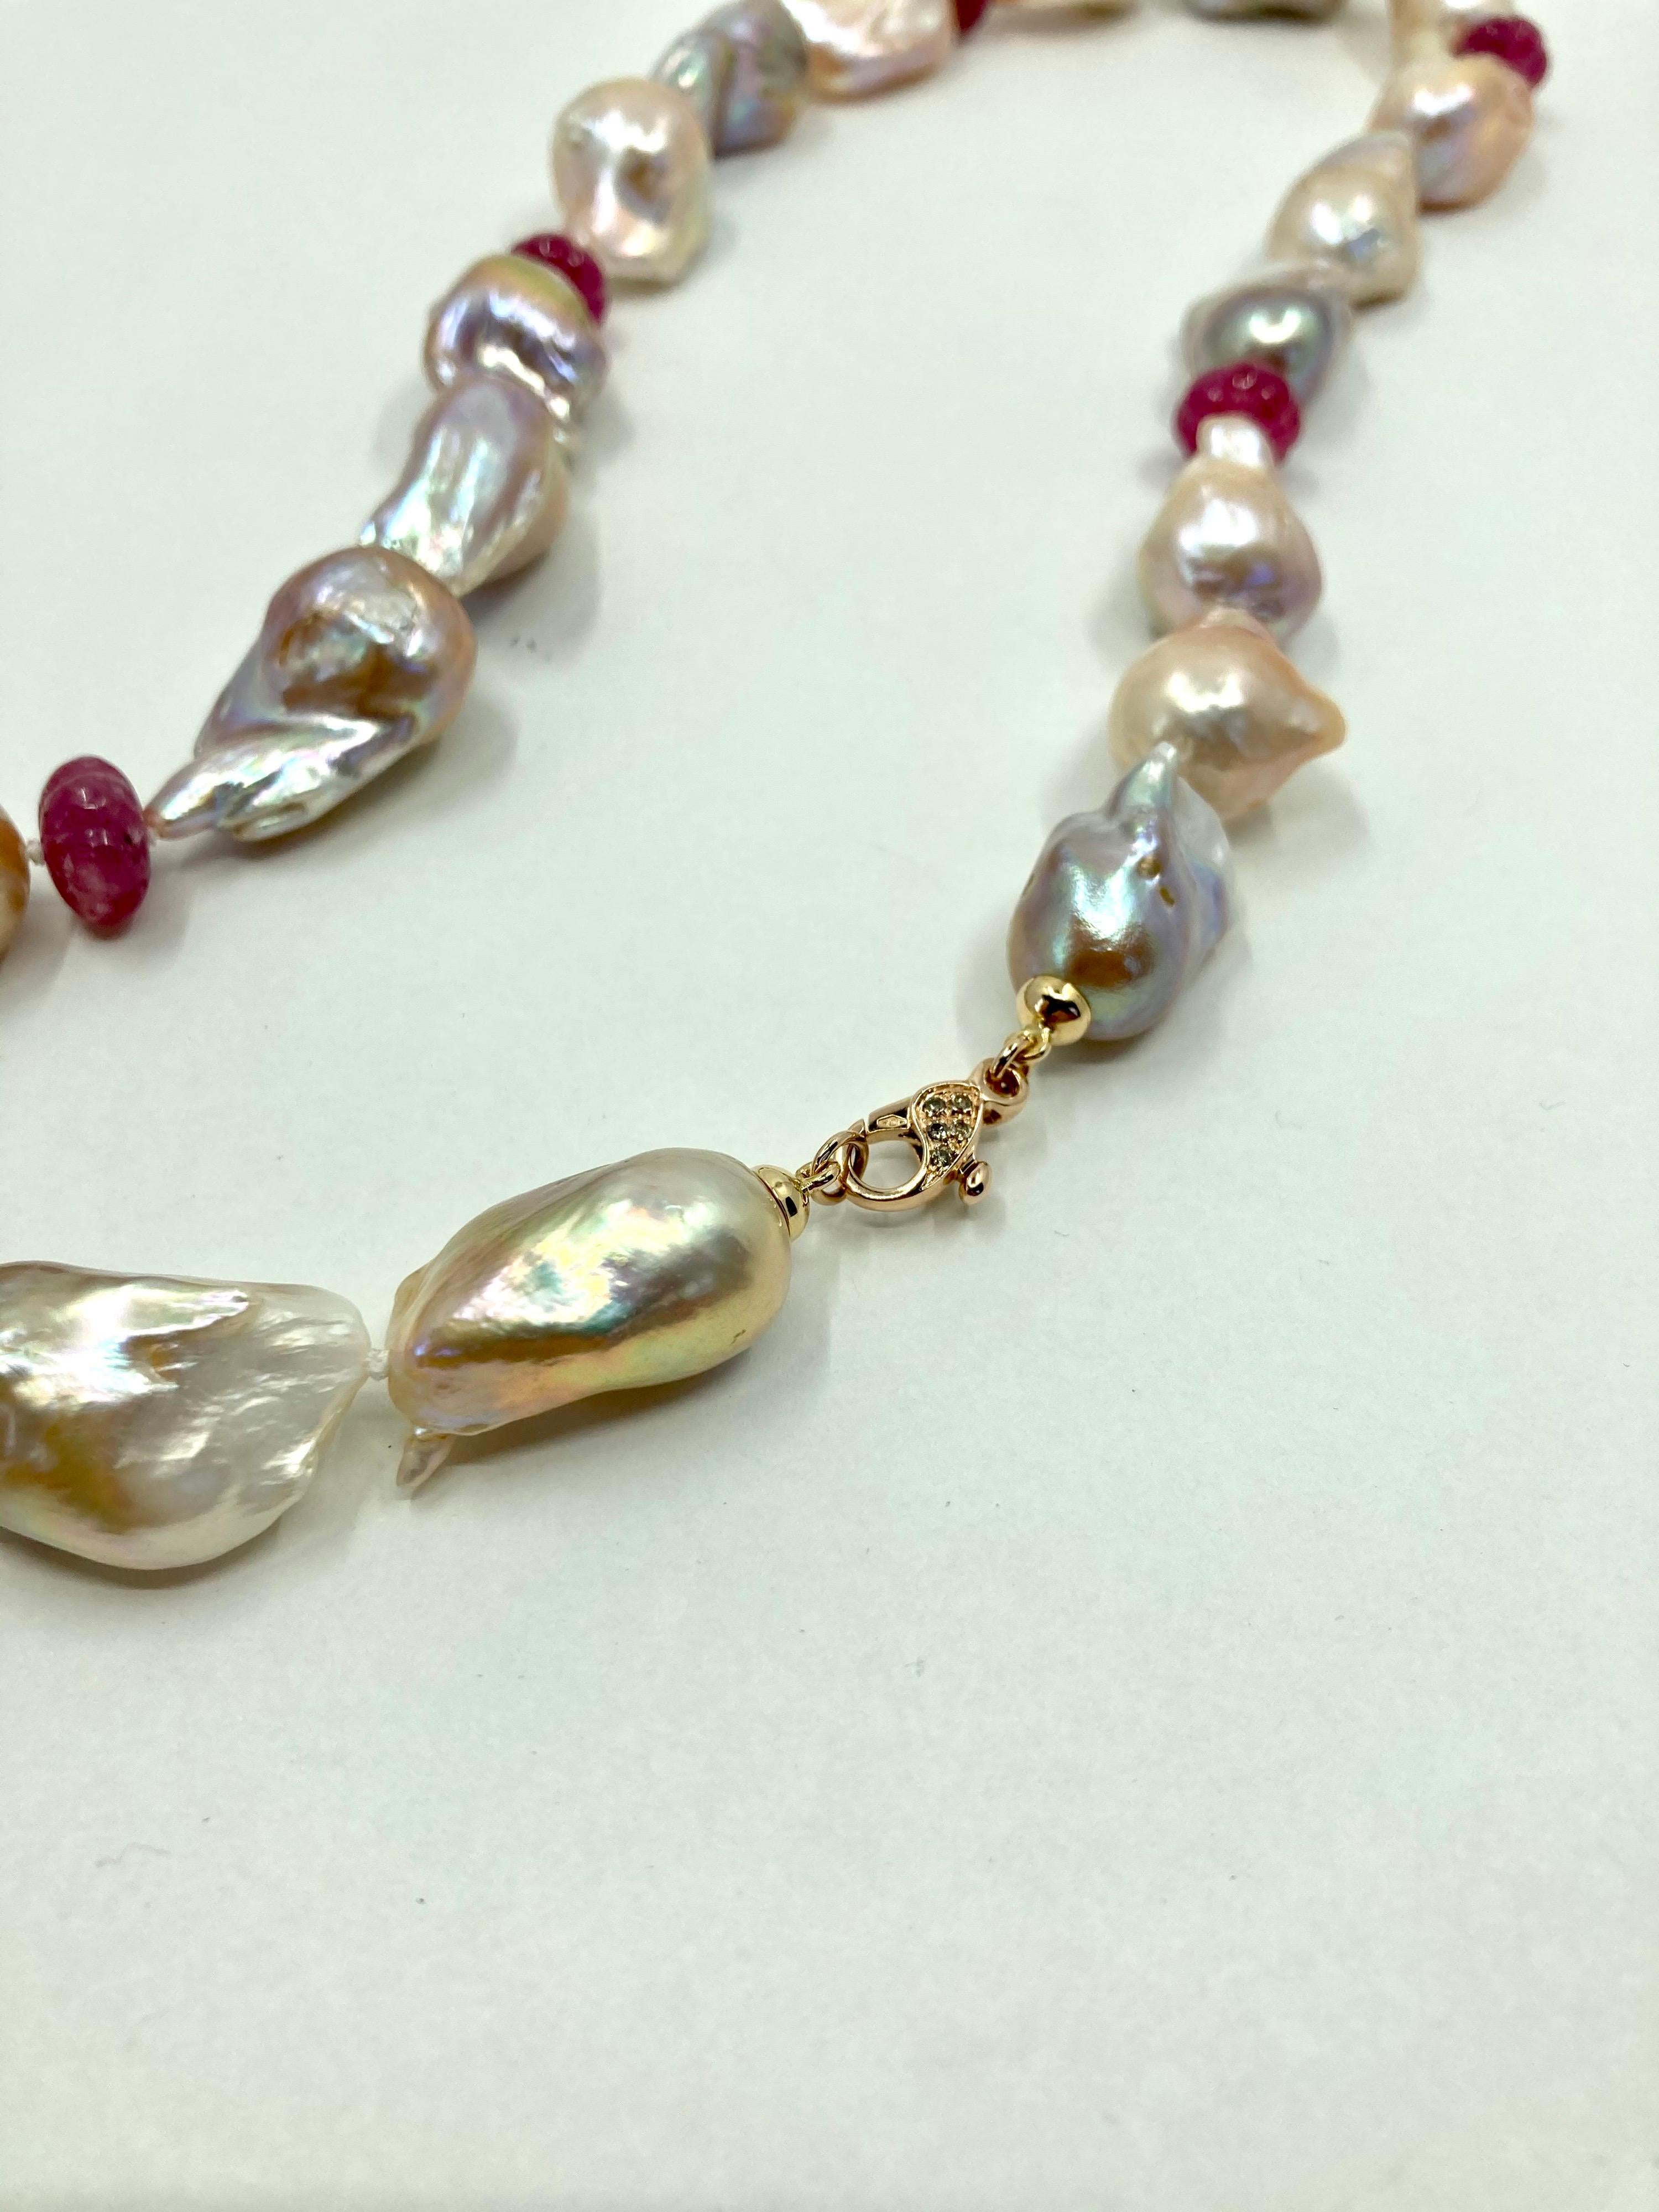 Brilliant Cut 18 Karat Gold Baroque Pearls, Rubies and Brown Diamonds Necklace For Sale